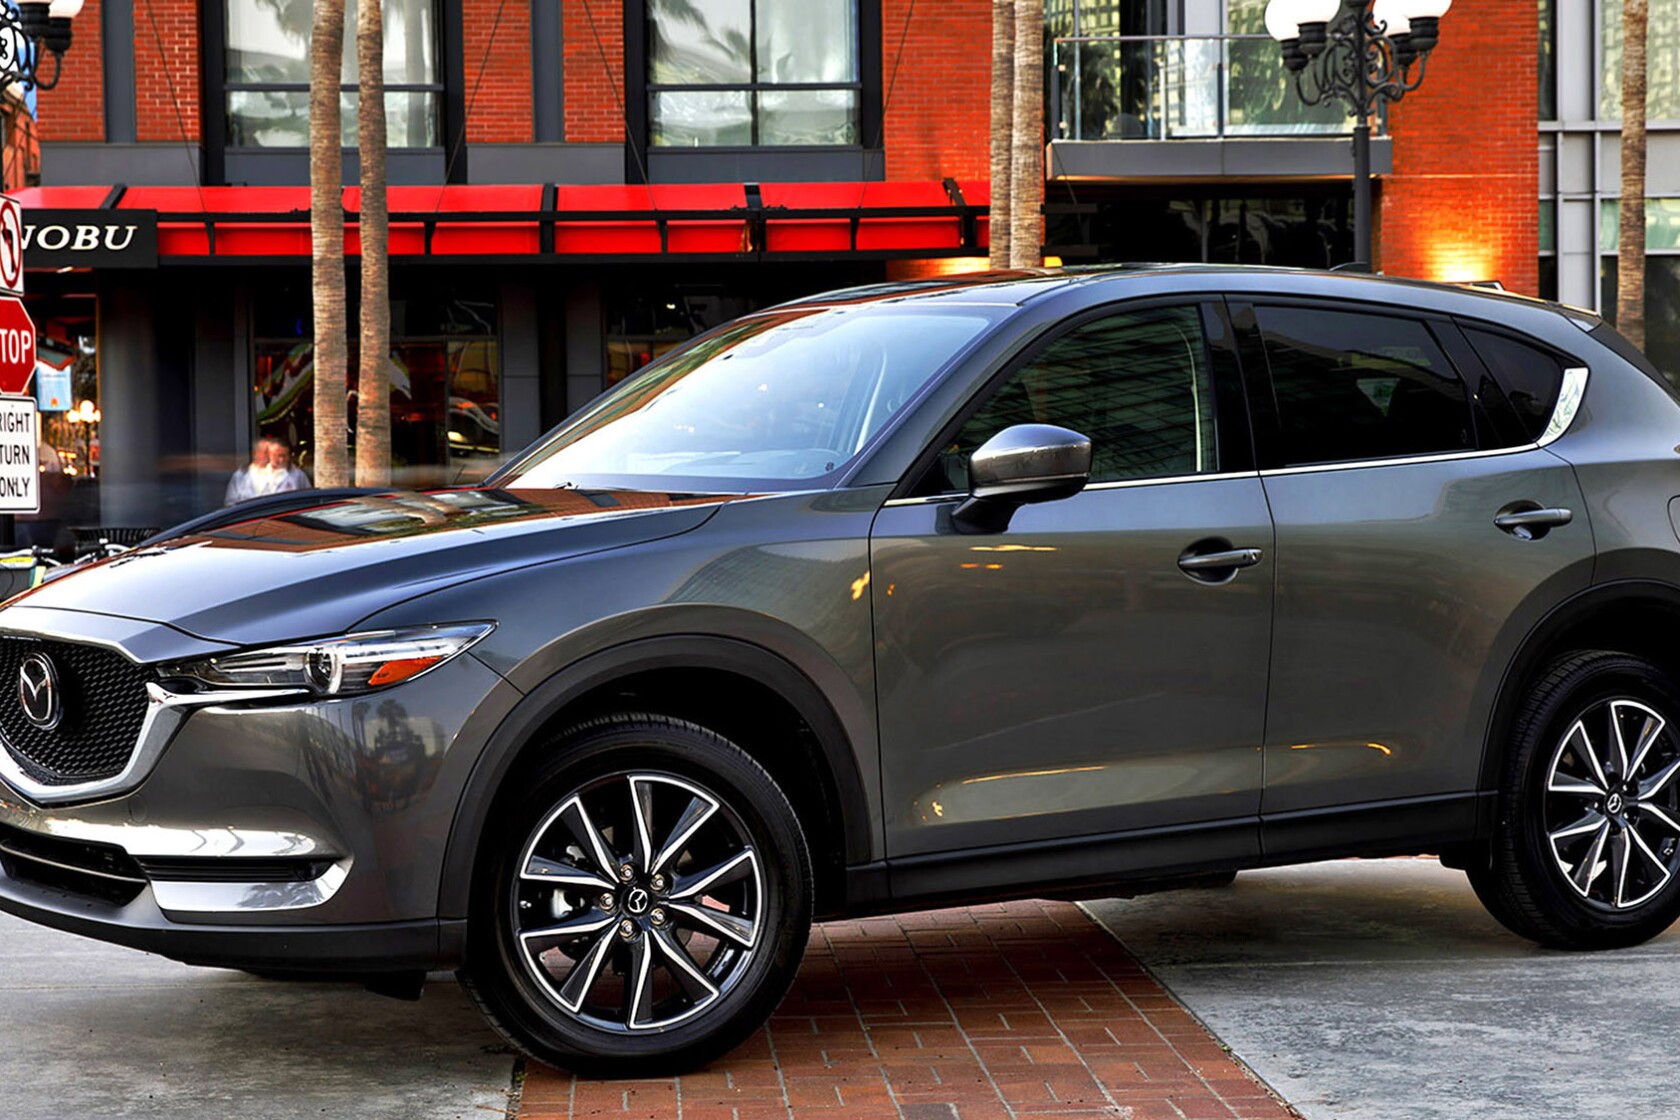 2017 Mazda CX-5: Boring is beautiful - Los Angeles Times